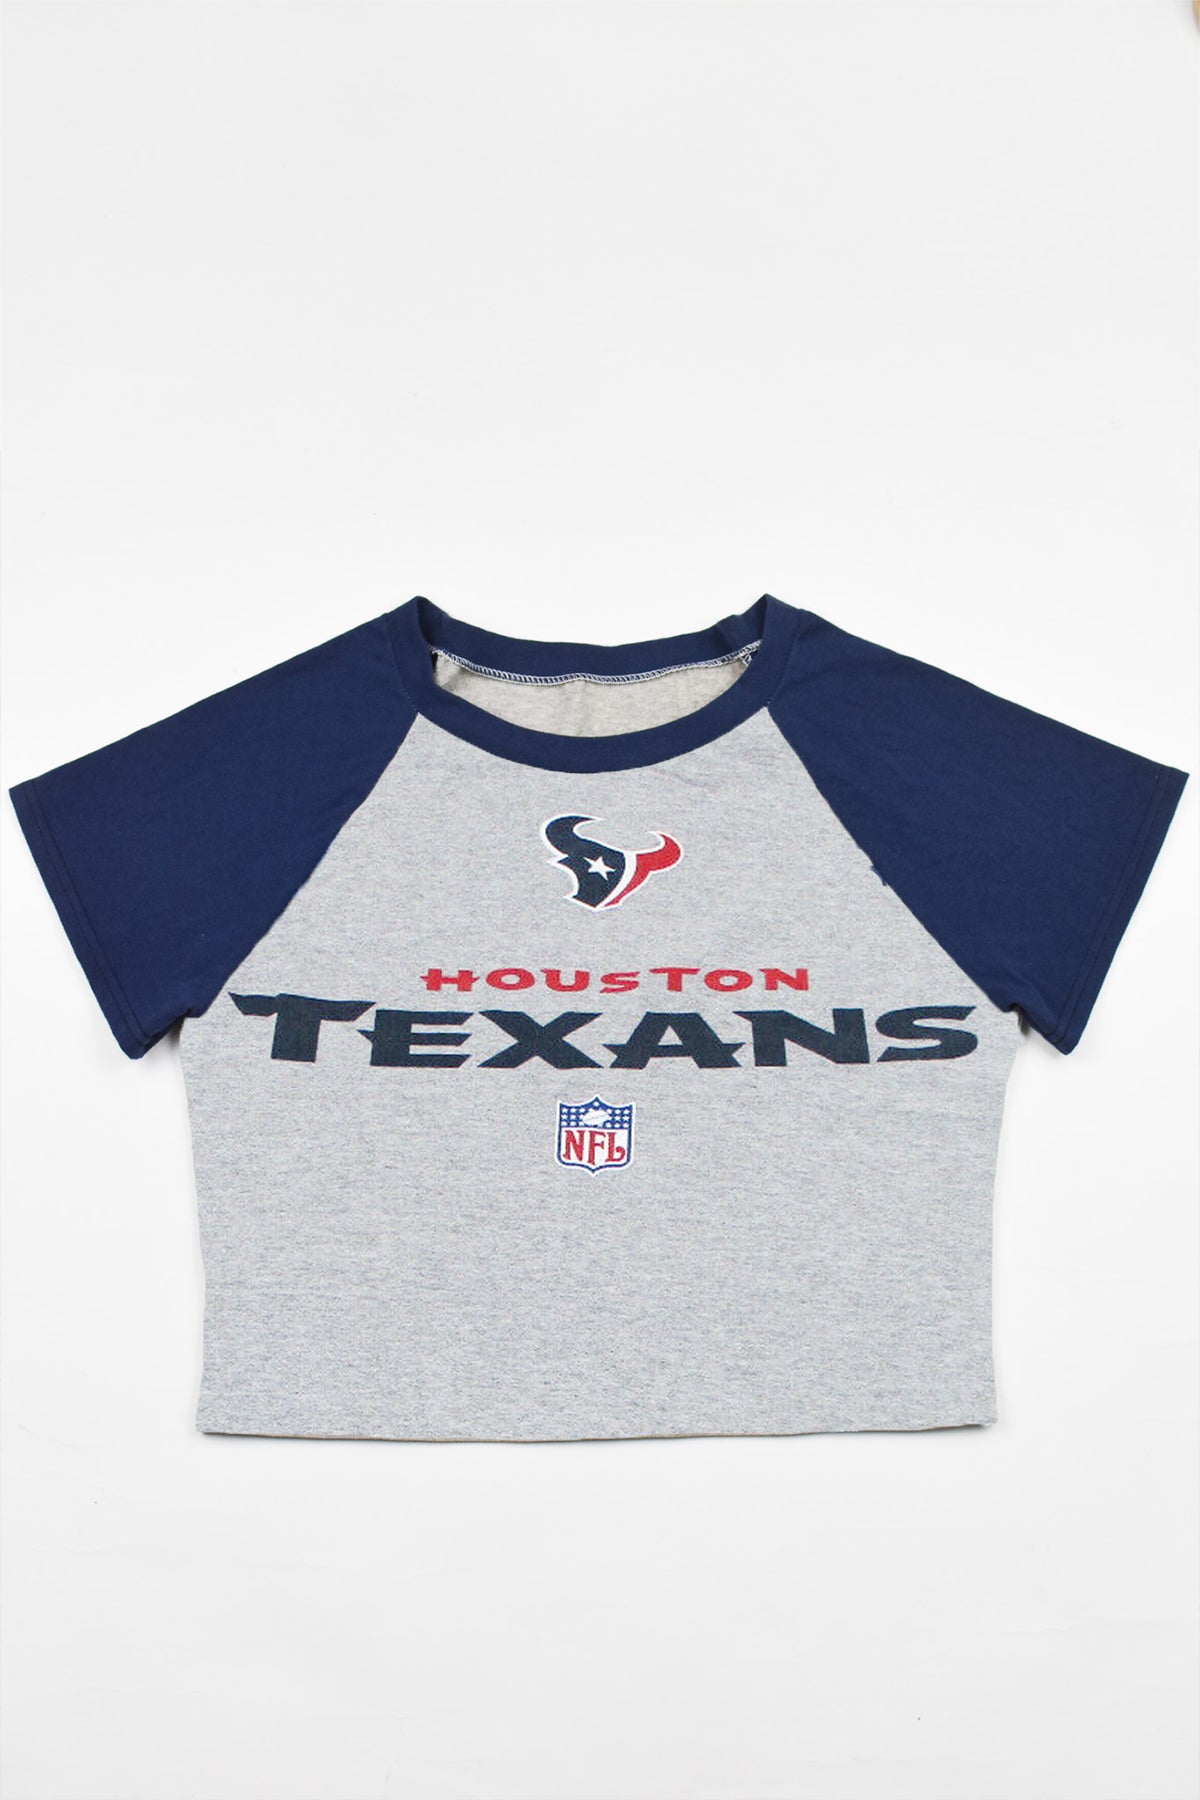 Upcycled Texans Baby Tee *MADE TO ORDER*